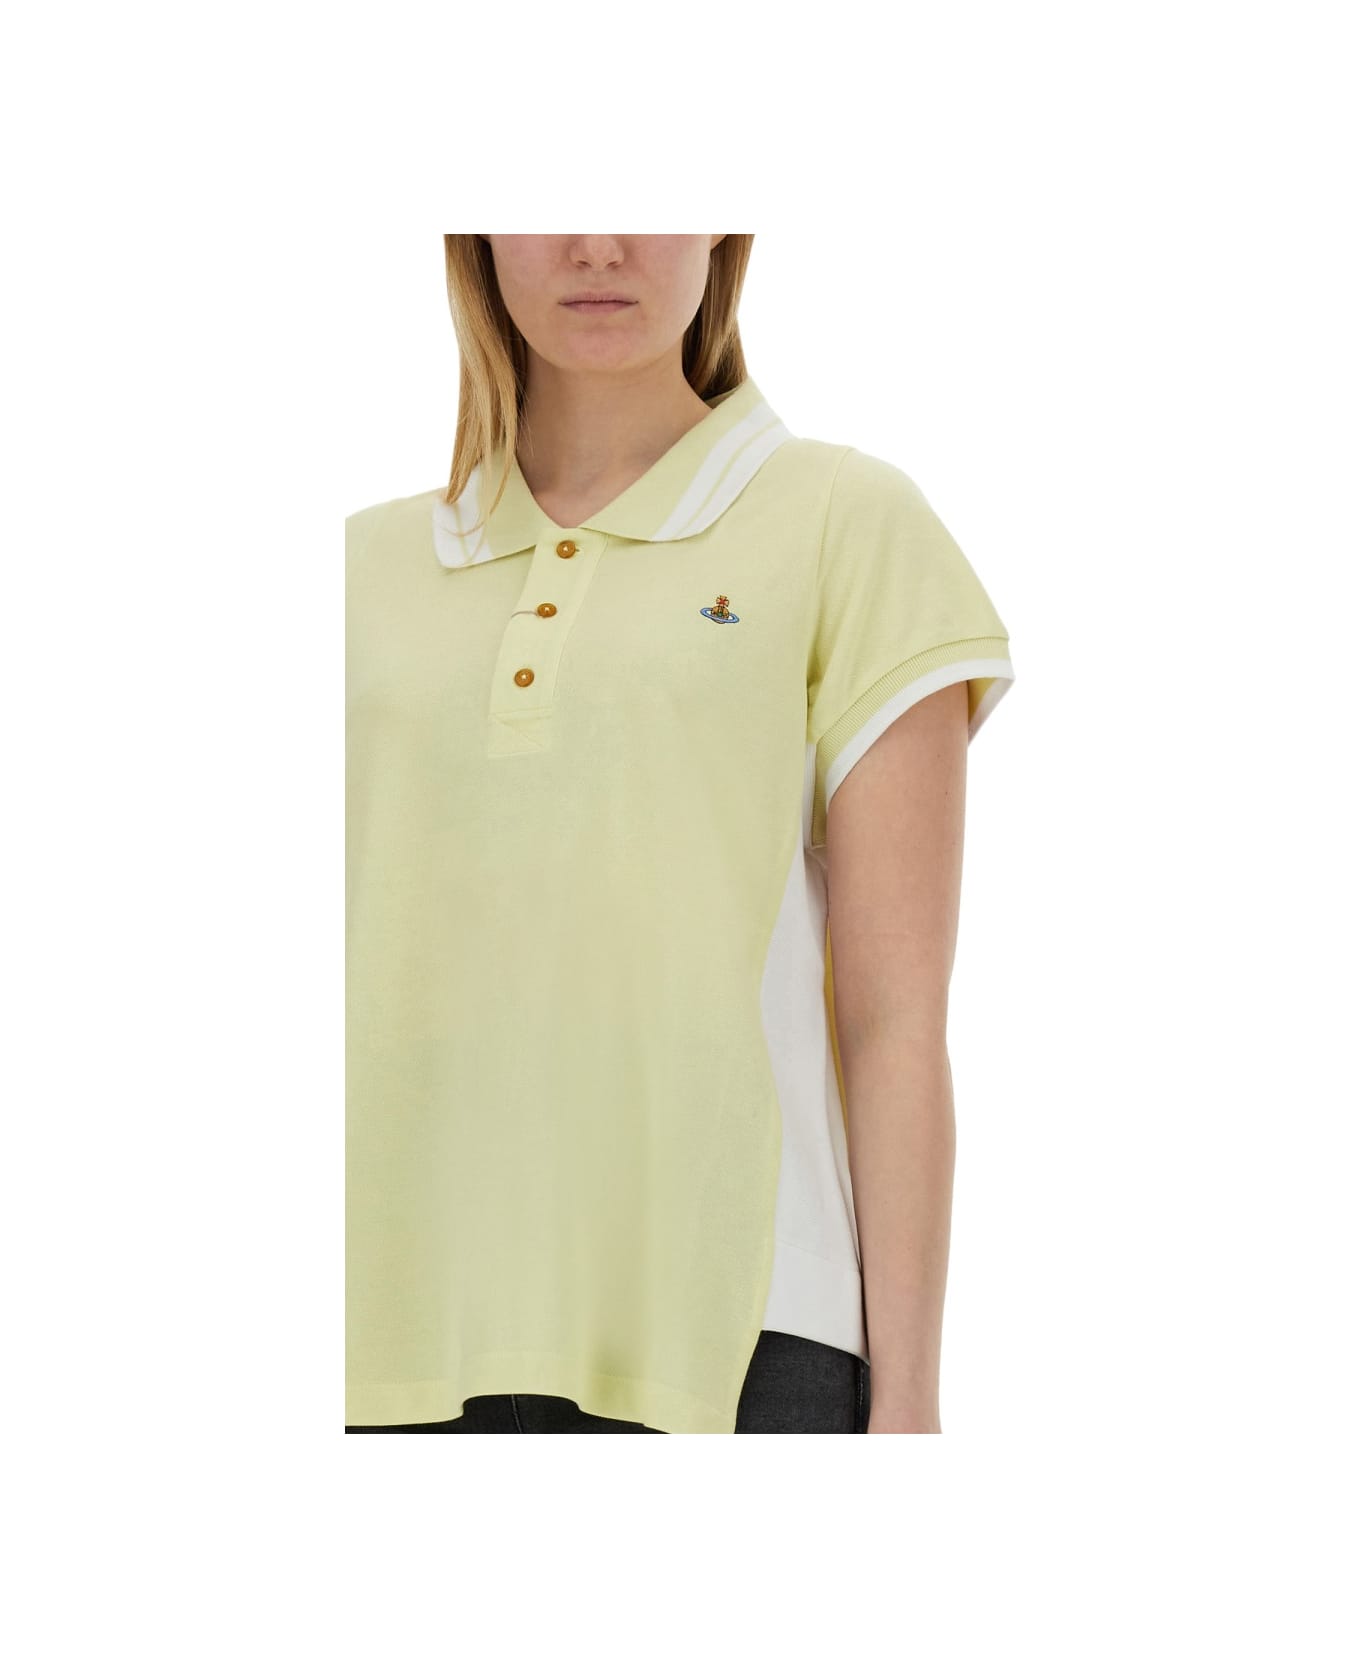 Vivienne Westwood Cotton Polo - YELLOW